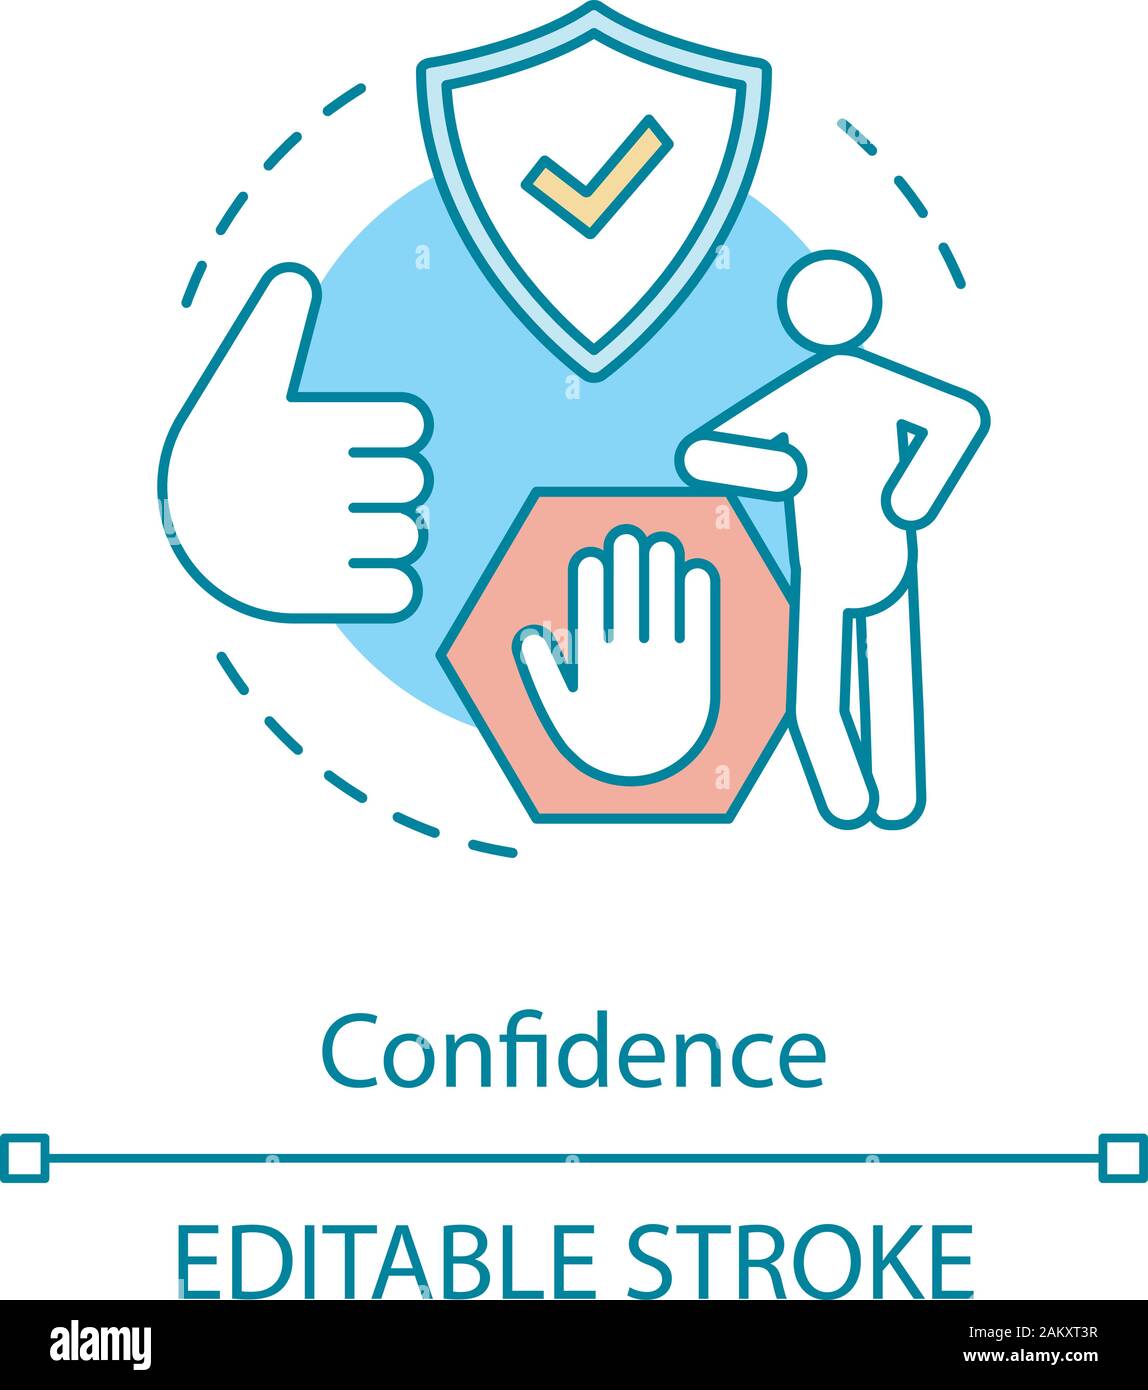 Confidence concept icon. Assurance, certainty. Insured man